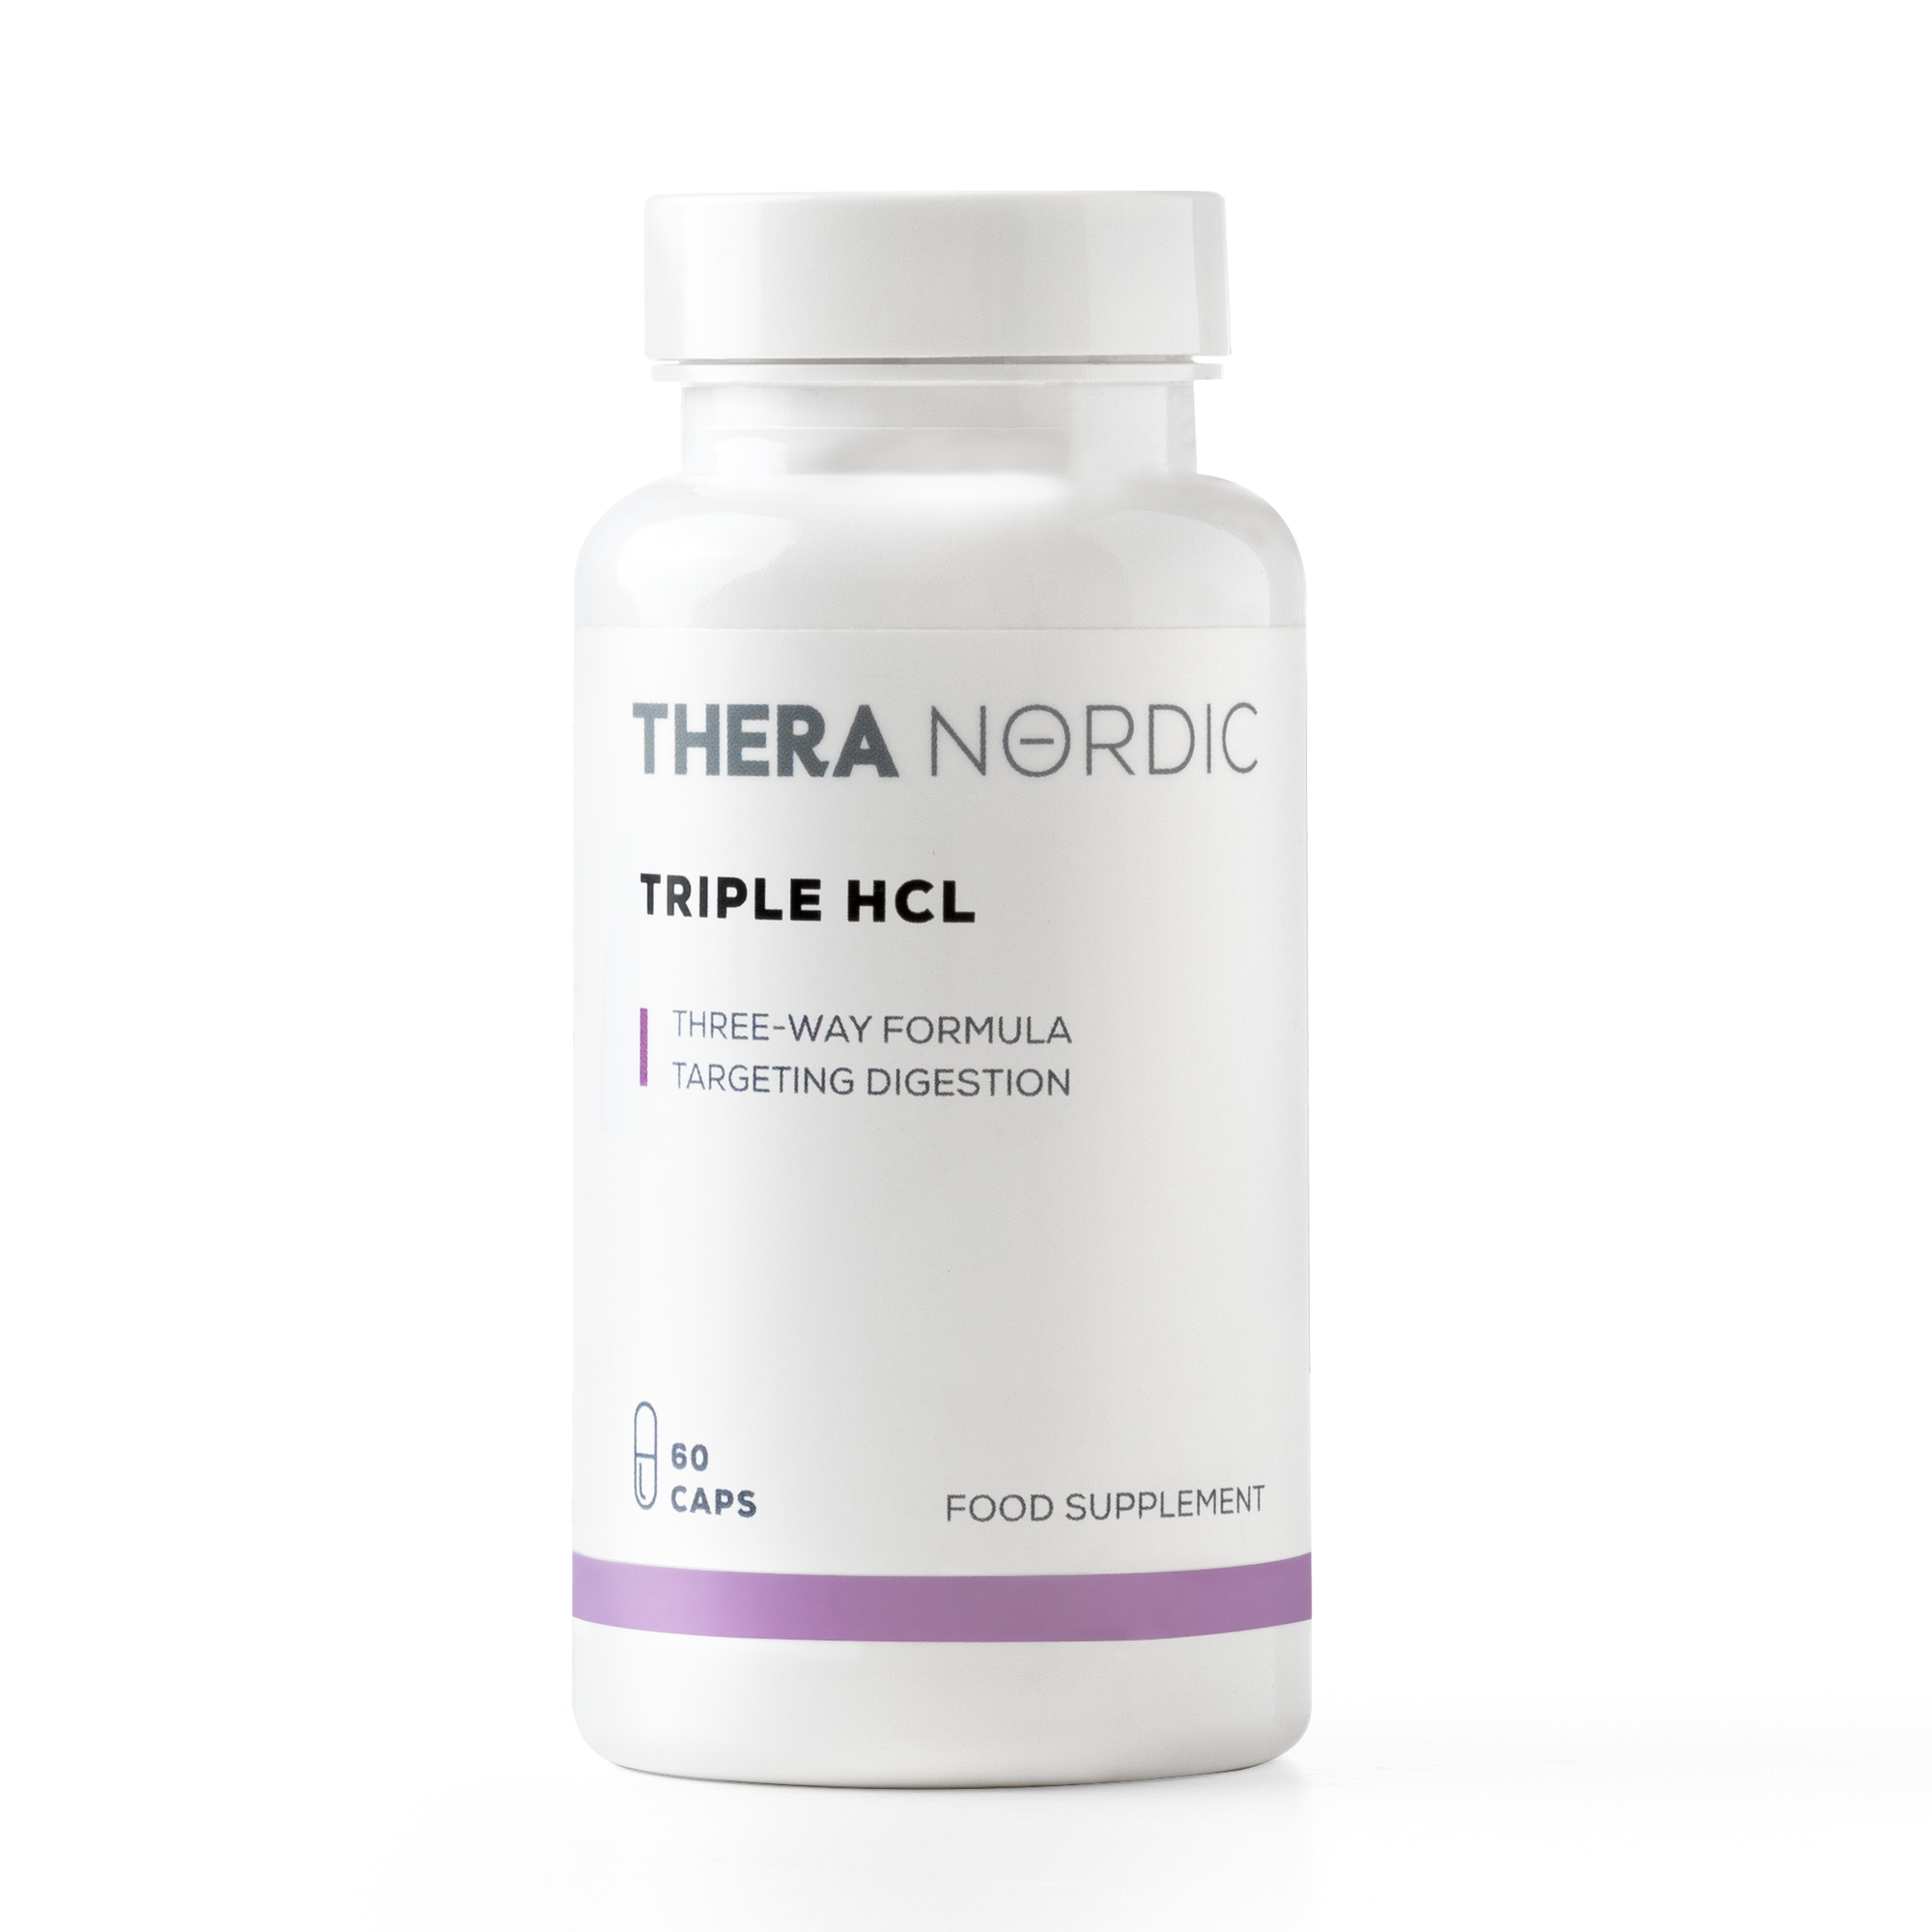 Frequently Asked Questions about Triple HCL